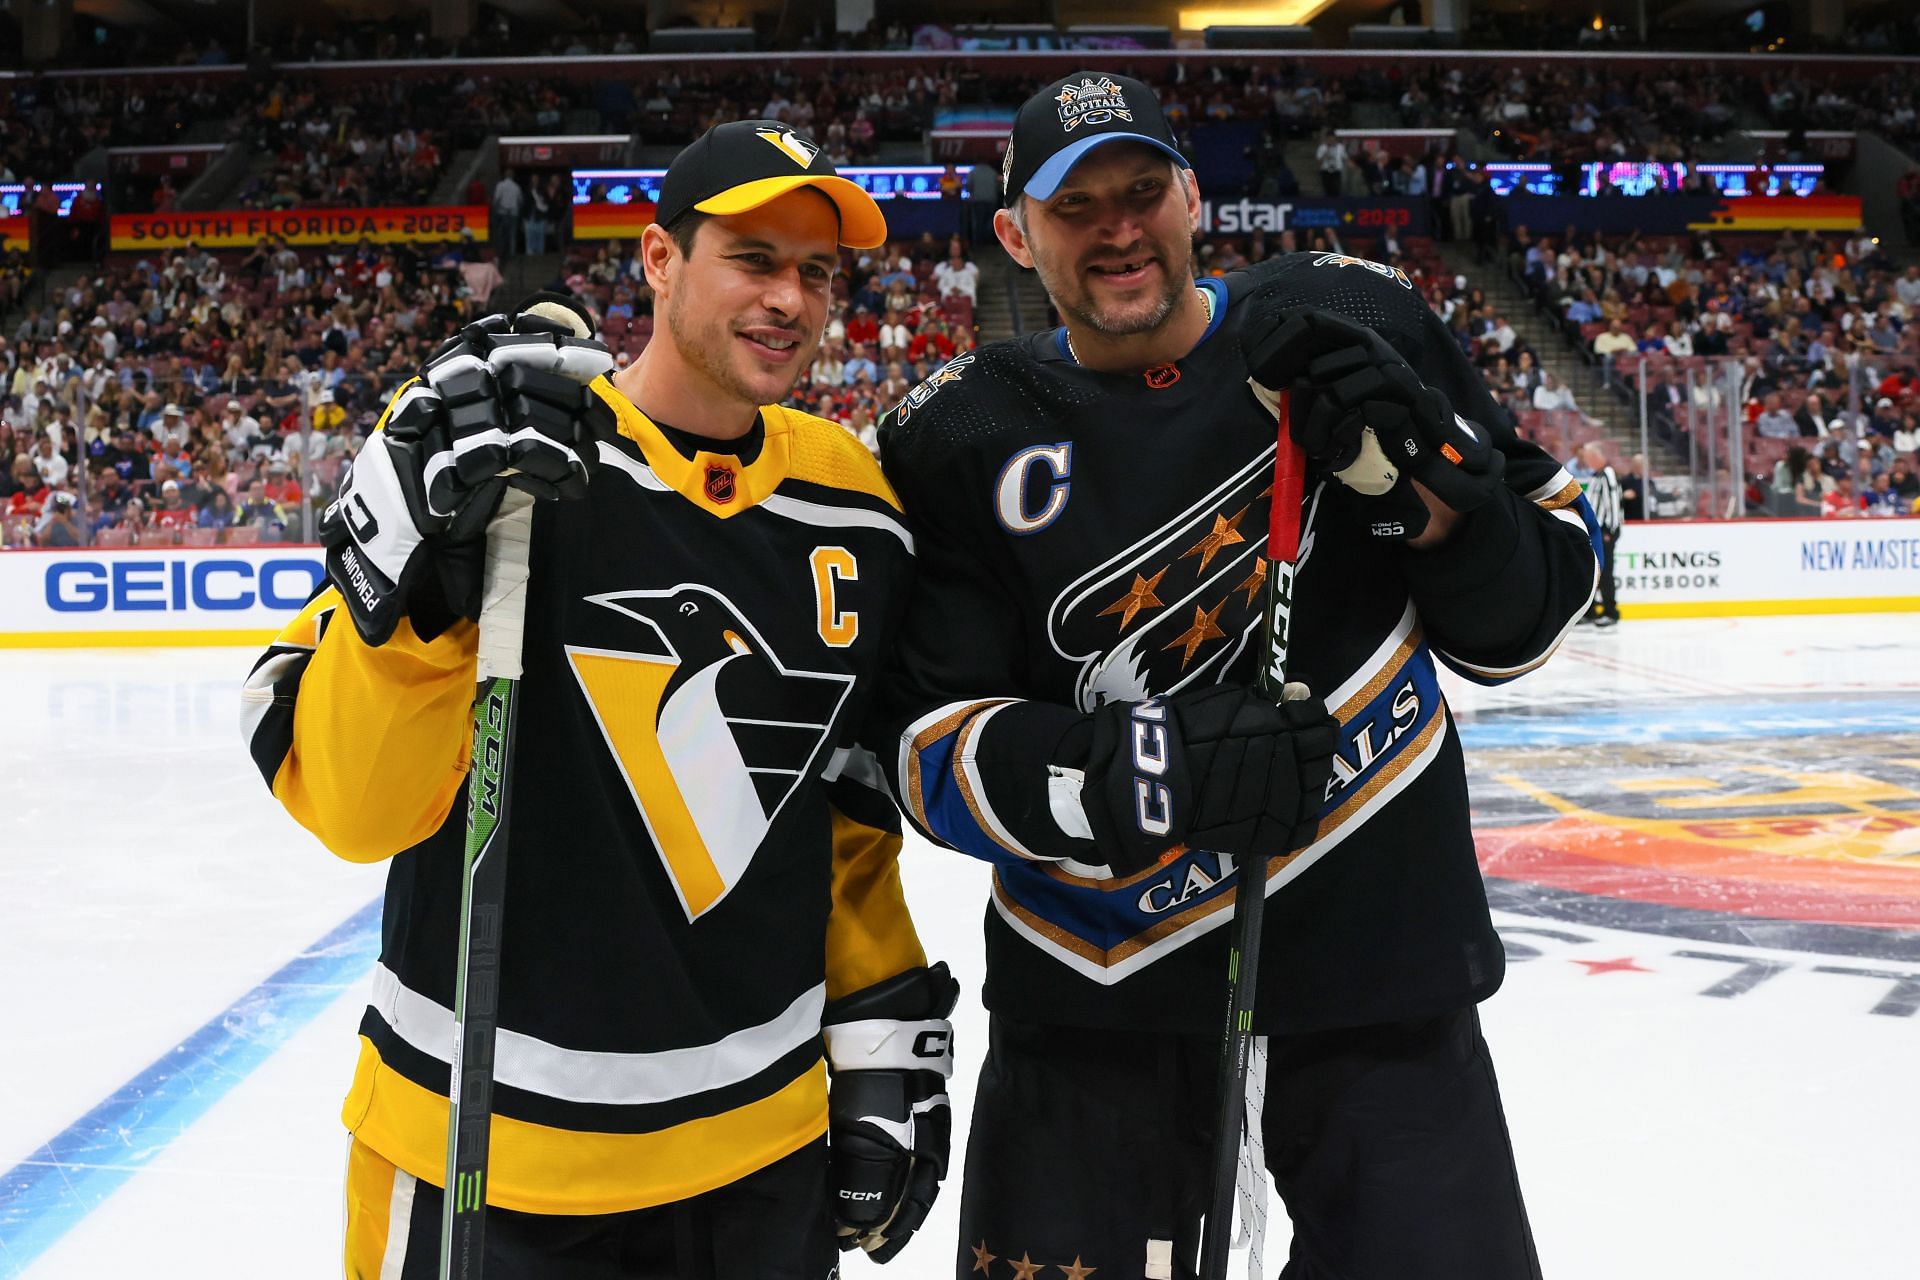 NHL All-Star Skills Who won the challenge? Full details